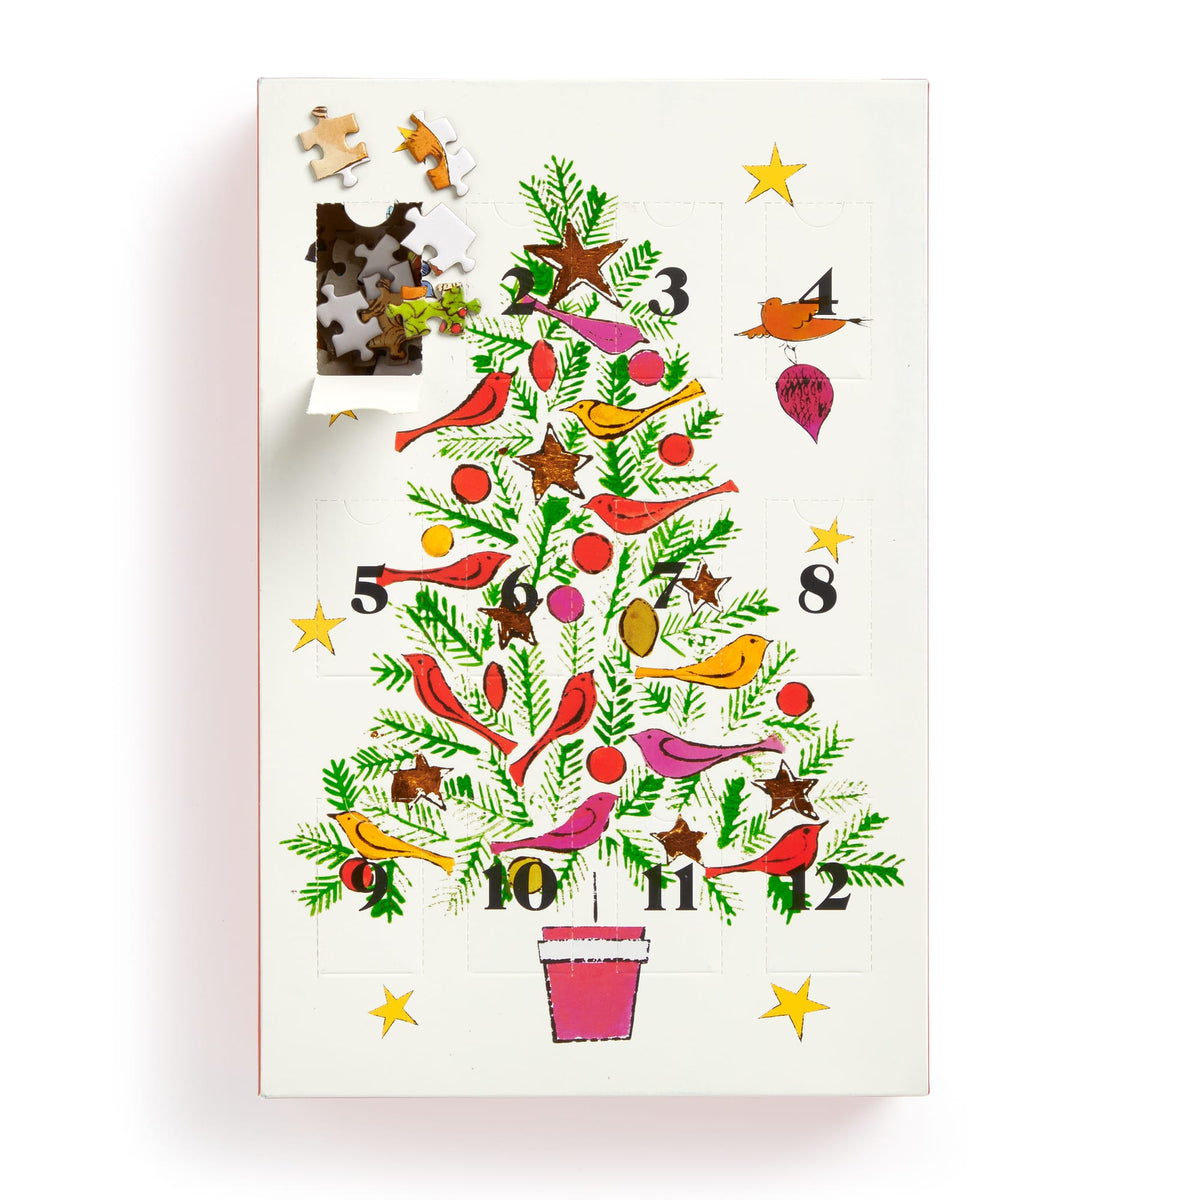 Whimsy Christmas Trees Art Party Kit! At Home Paint Party Supplies